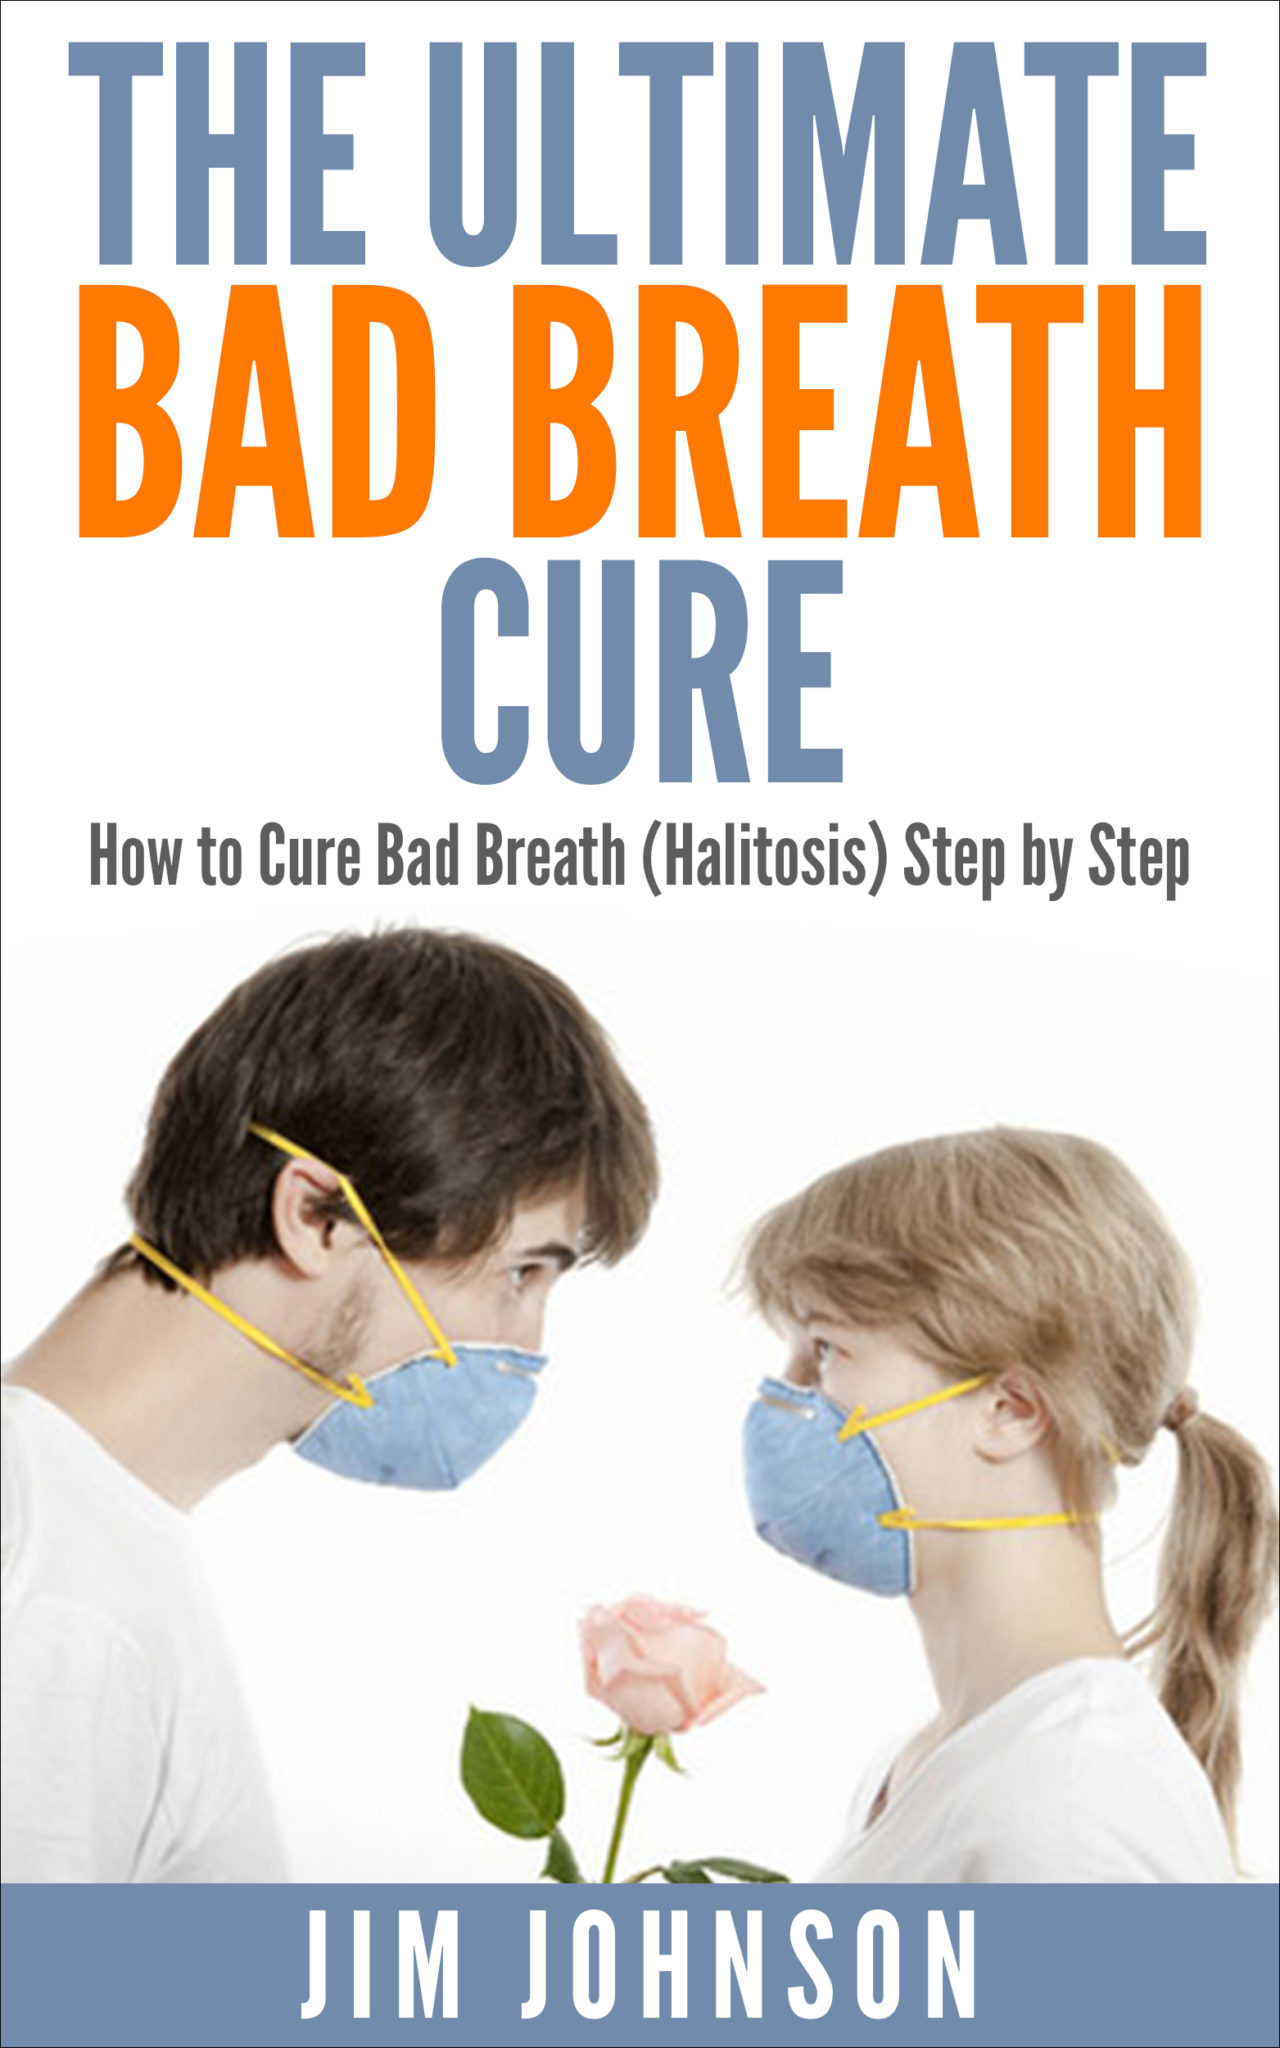 FREE: The Ultimate Bad Breath Cure: How to Cure Bad Breath (Halitosis) Step by Step by Jim Johnson